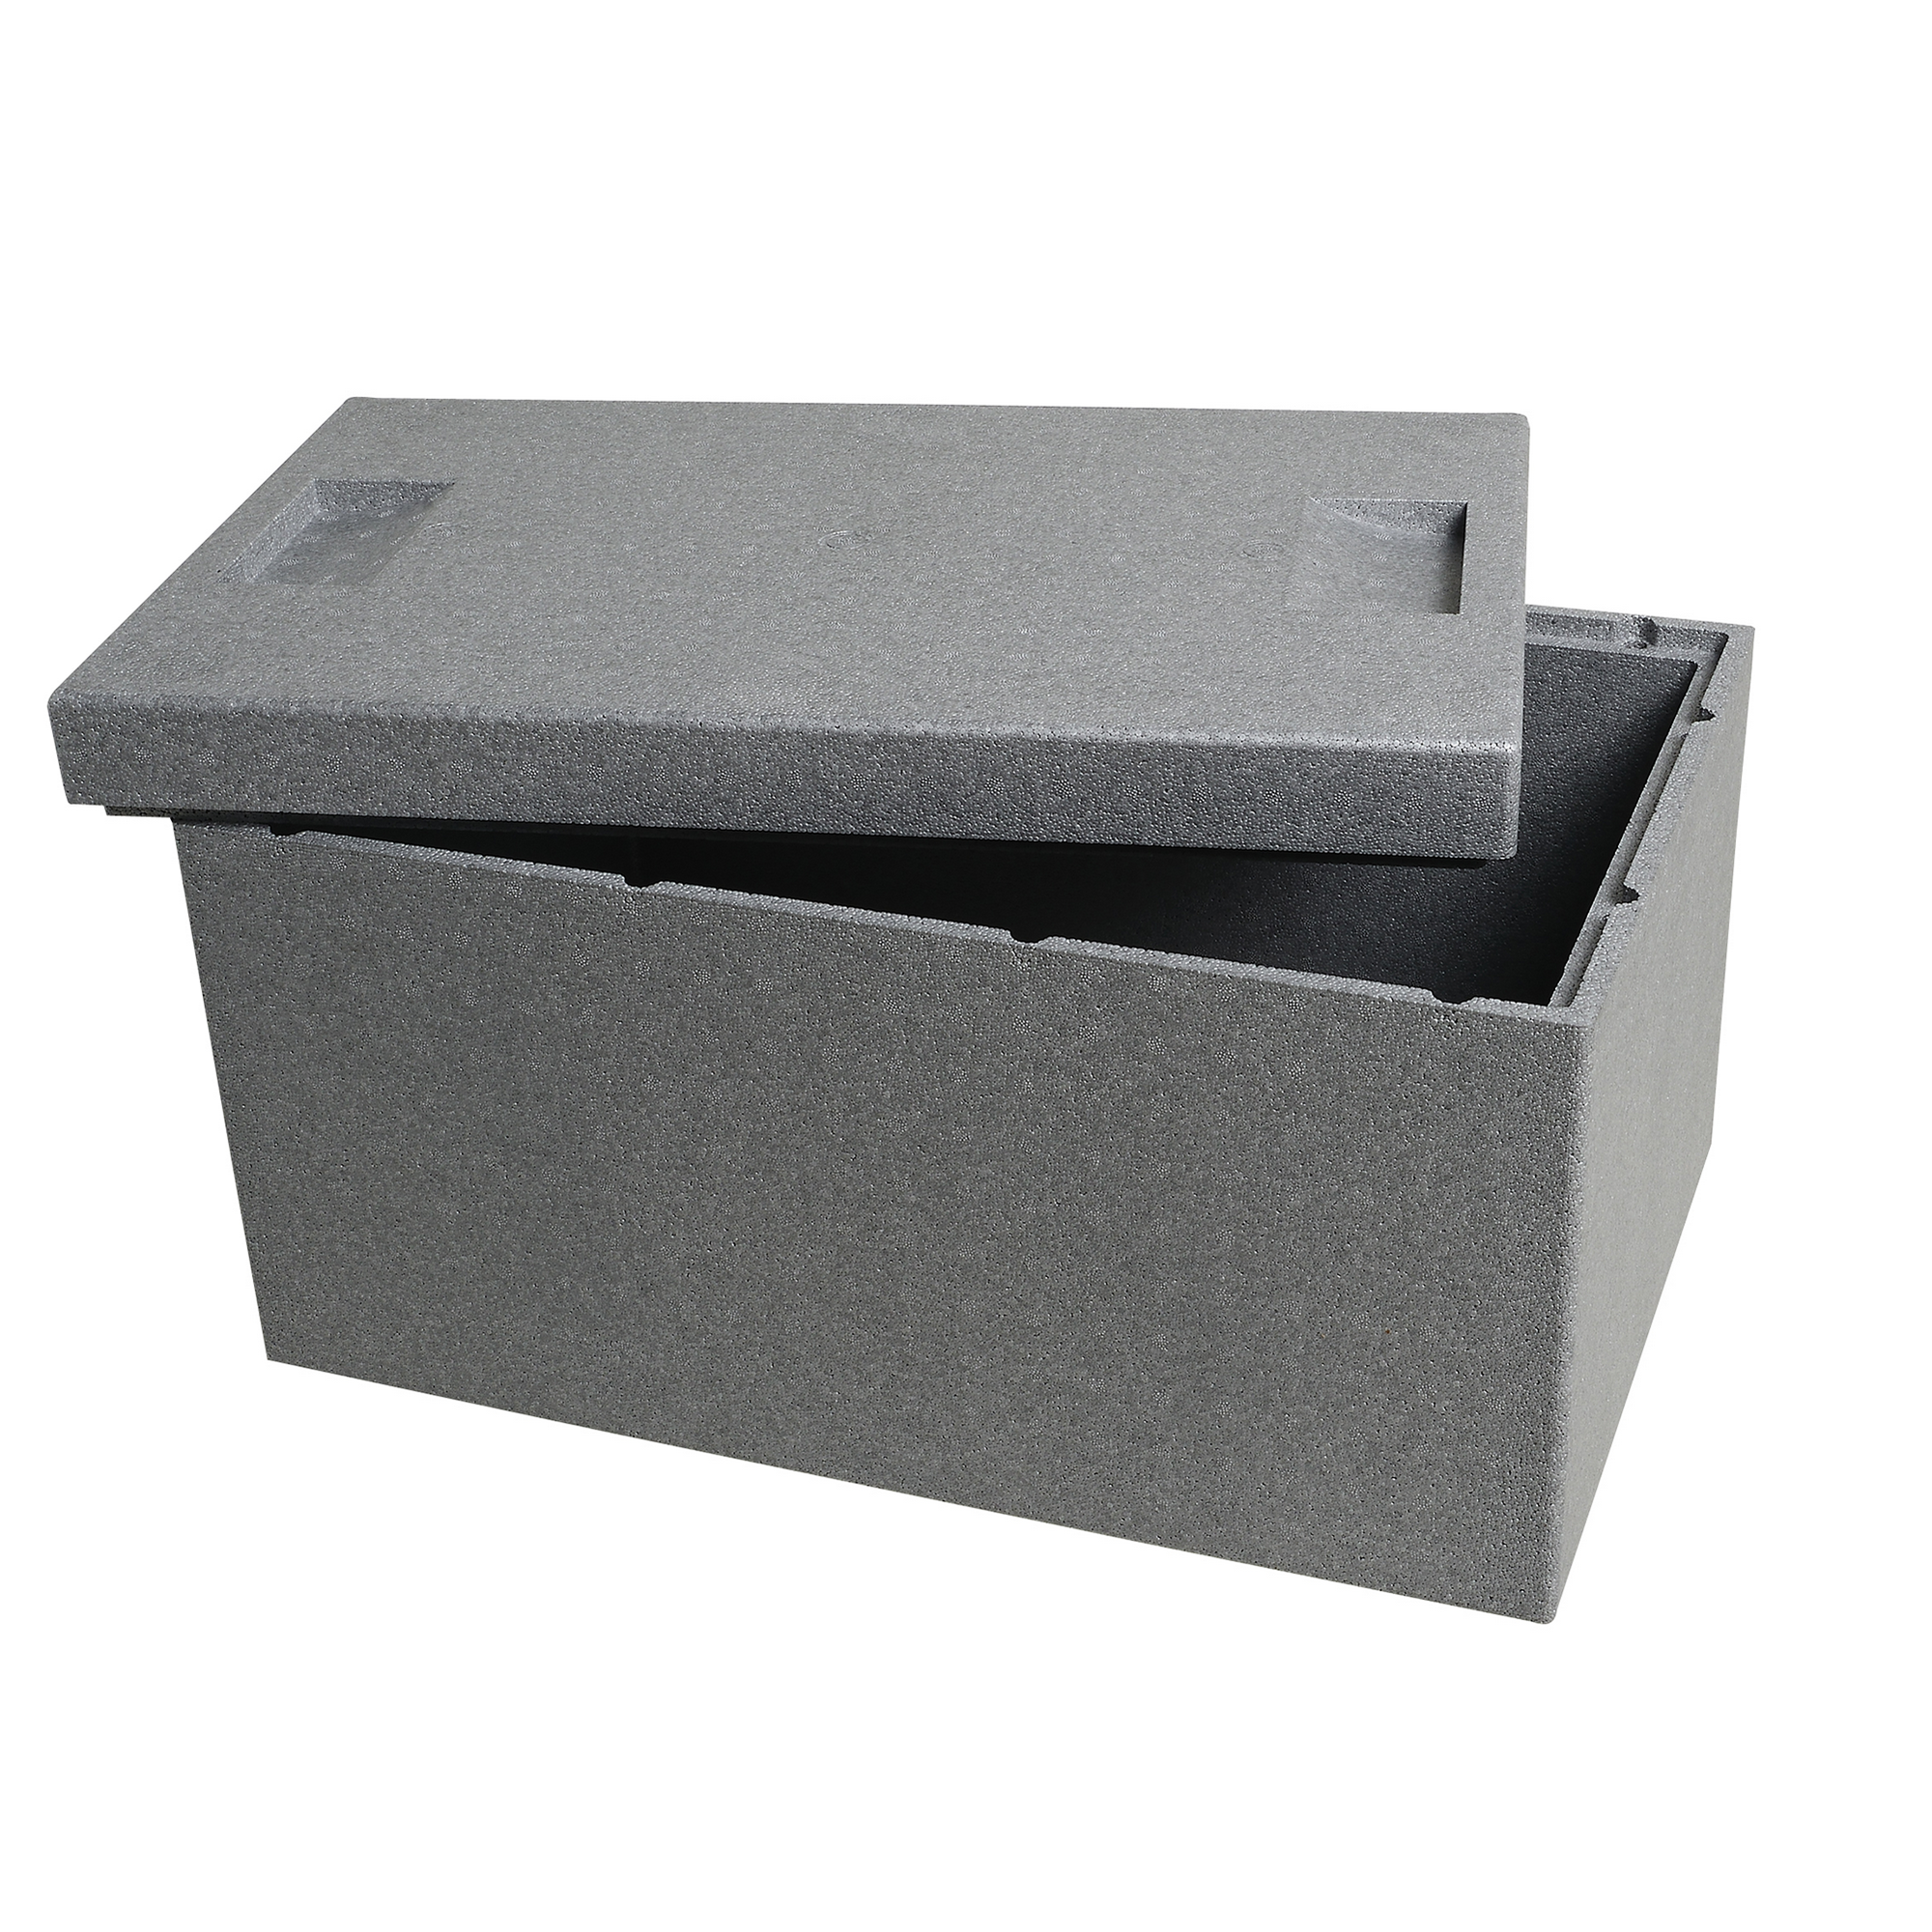 Thermobox mit Deckel, EPS, 54,5 x 35 x 30 cm + product picture